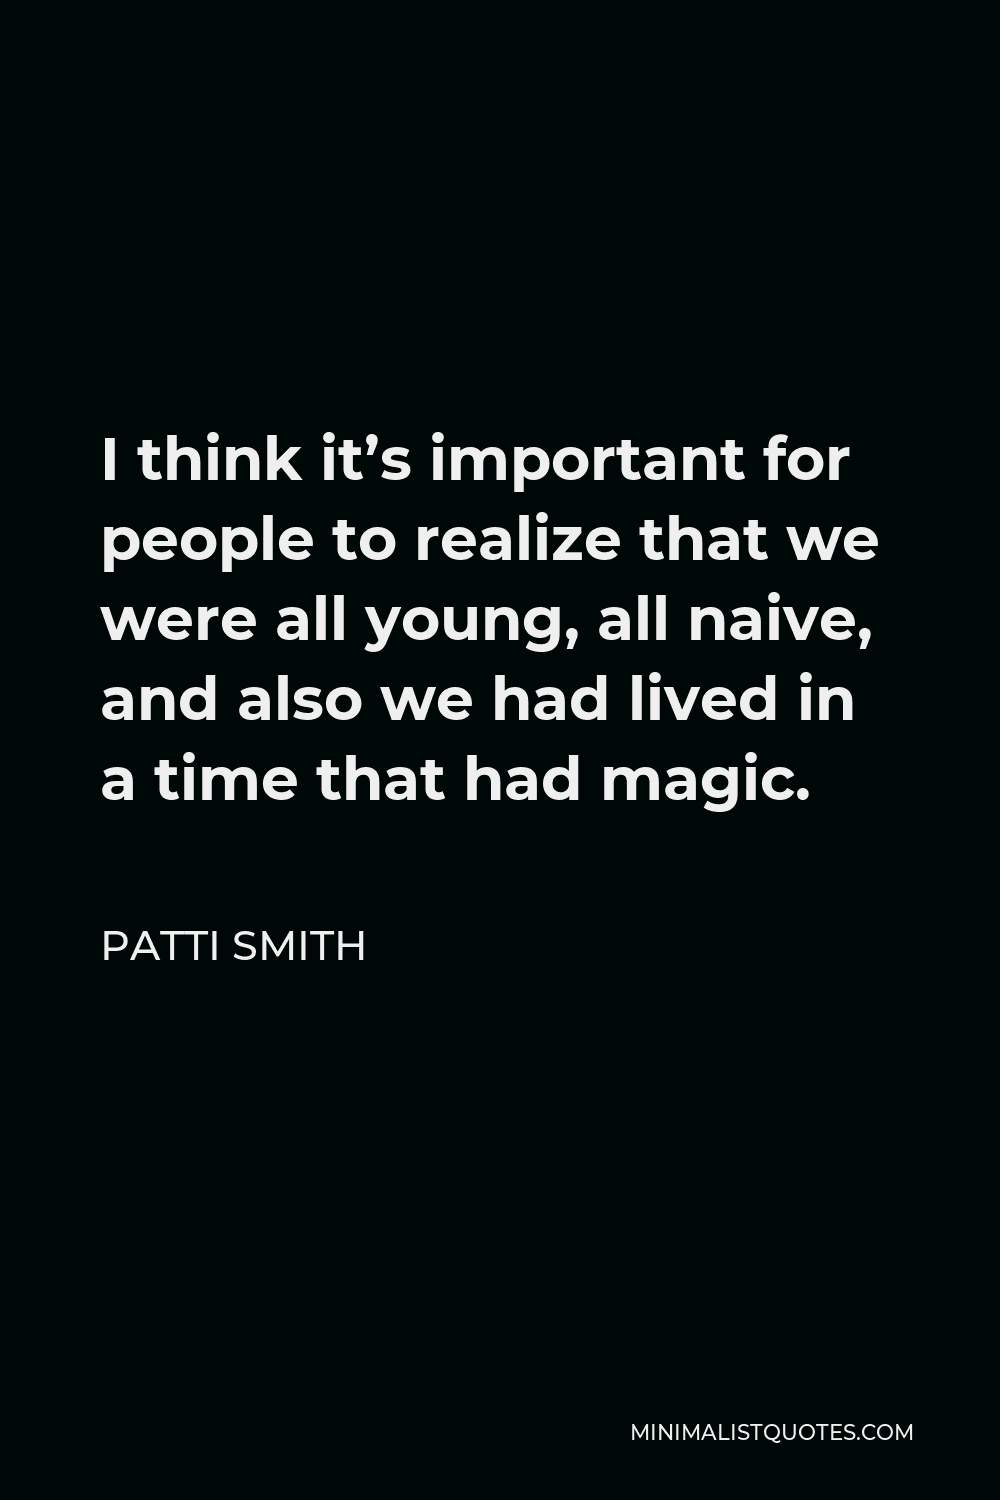 Patti Smith Quote - I think it’s important for people to realize that we were all young, all naive, and also we had lived in a time that had magic.